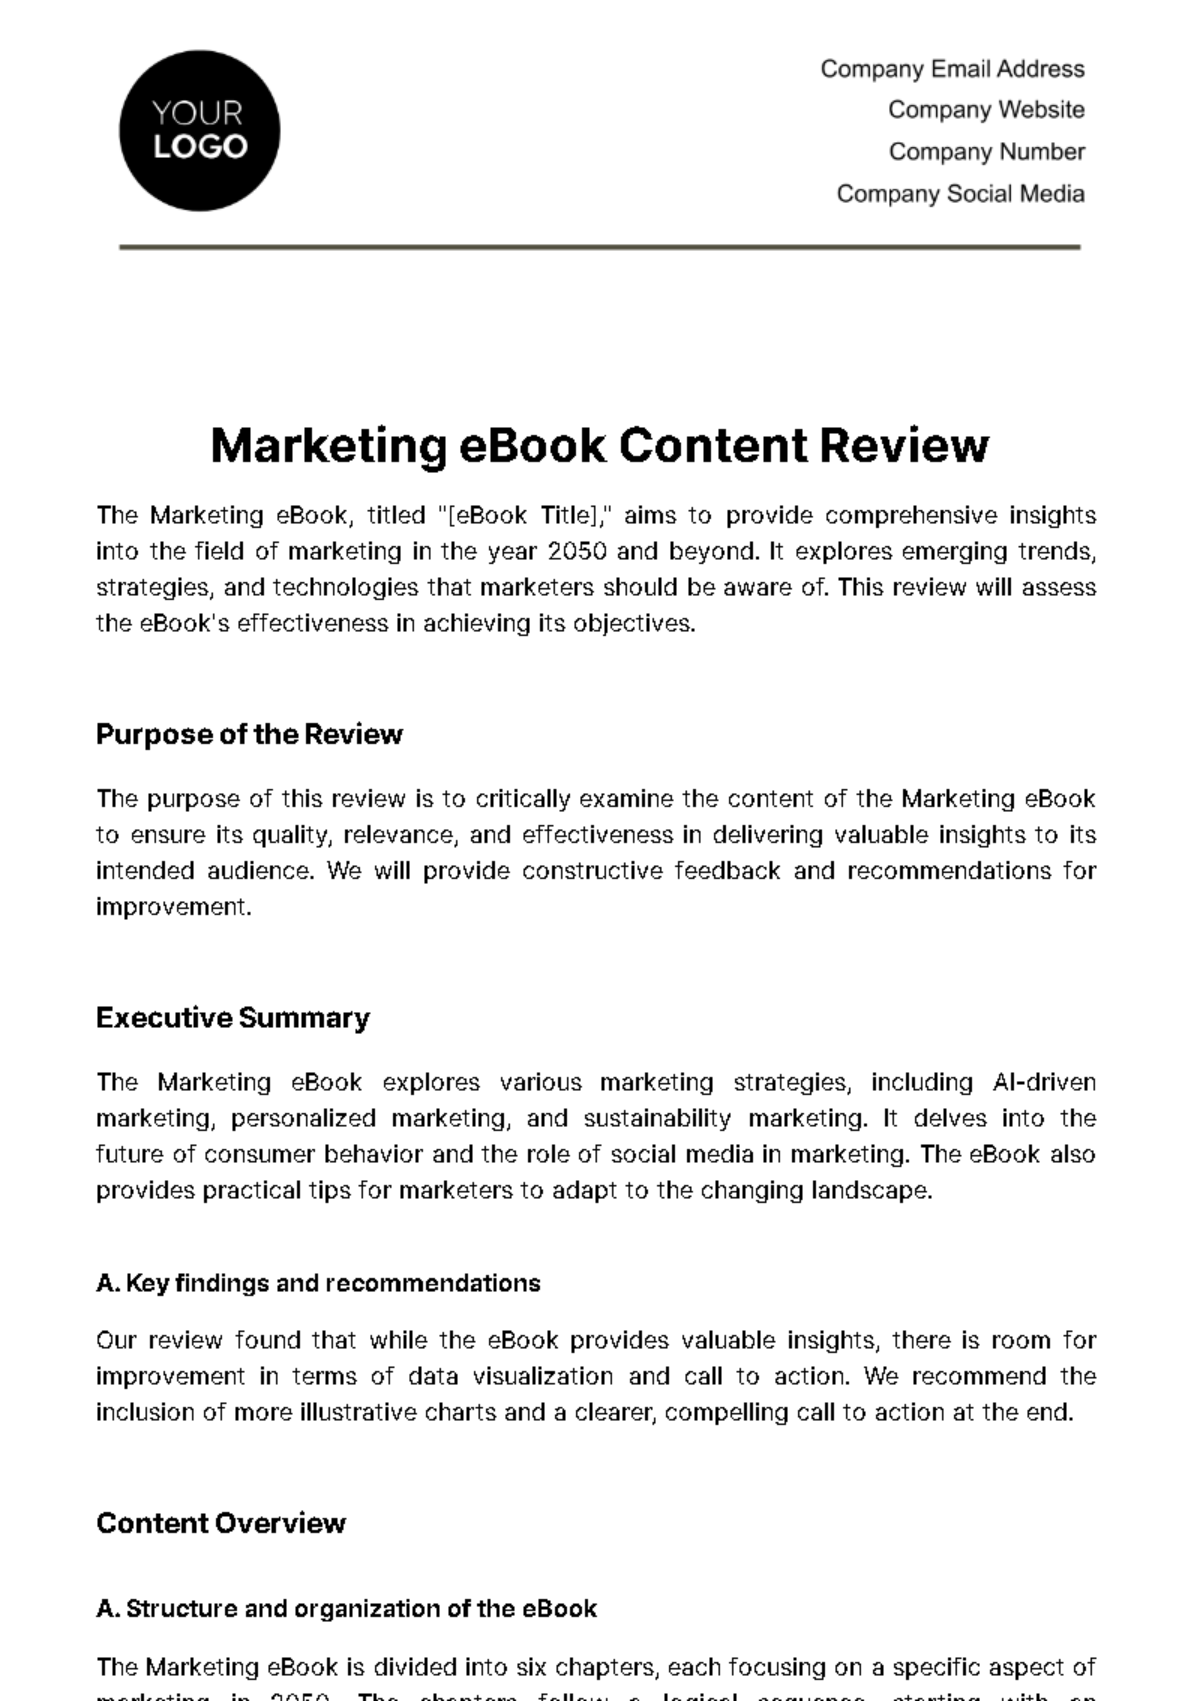 Free Marketing eBook Content Review Template